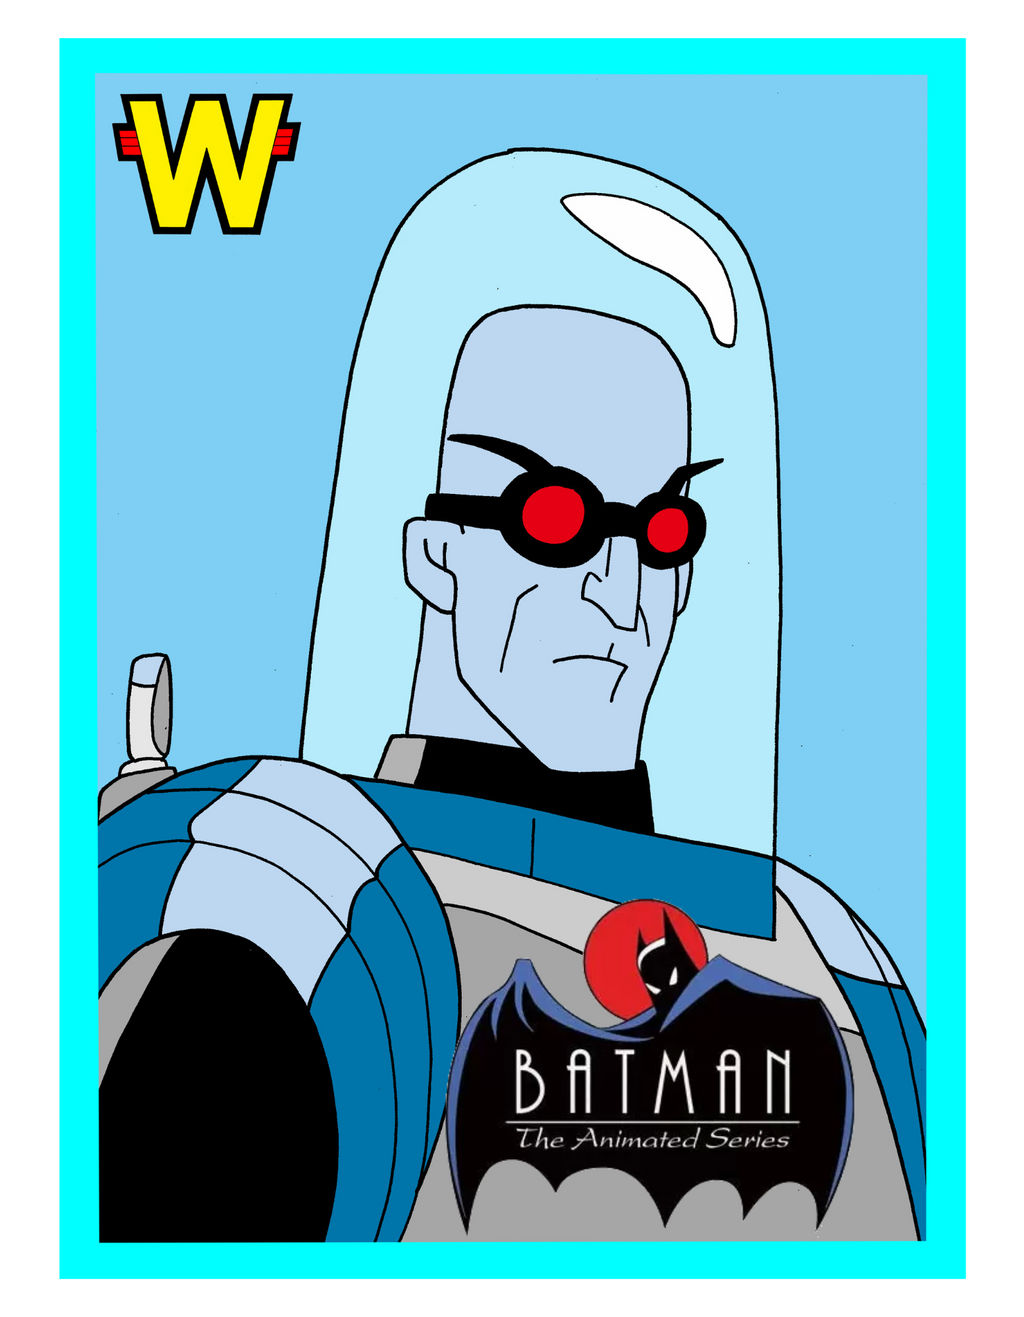 1992 Mr. Freeze from Batman Animated Series by donandron on DeviantArt